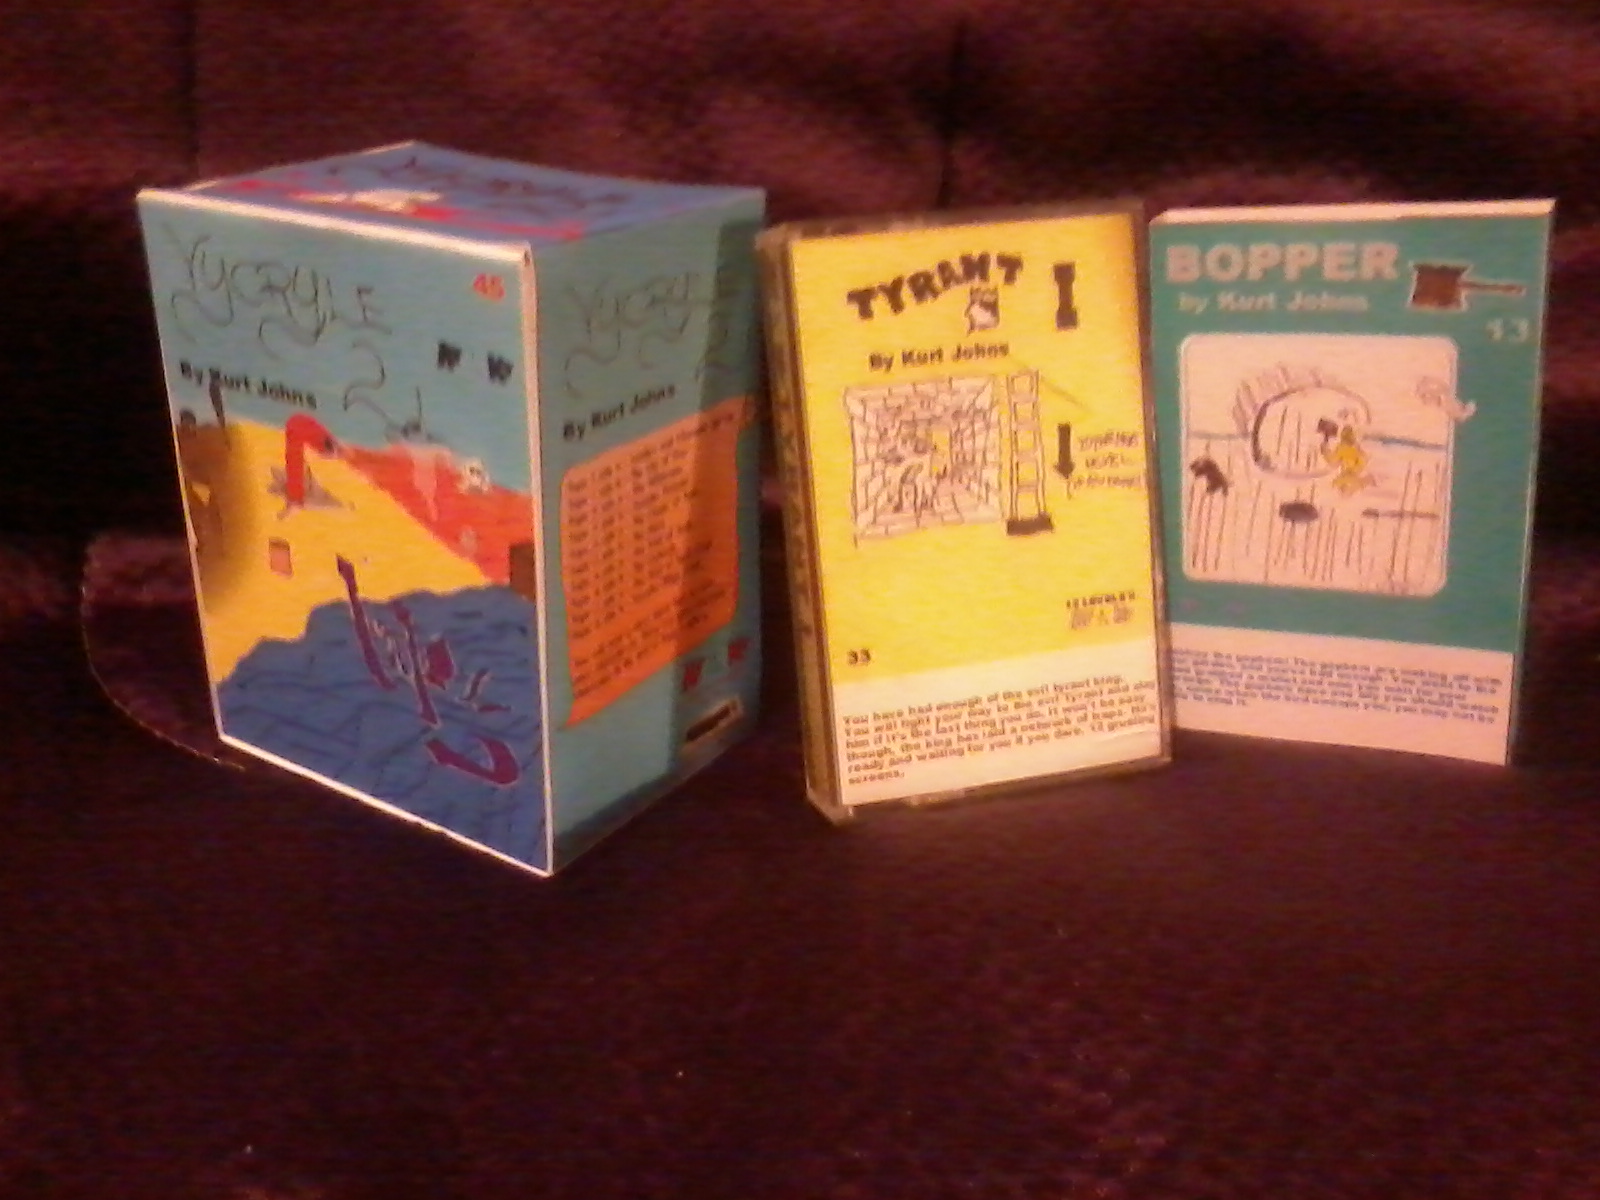 V2 in a box, and bopper in an O card